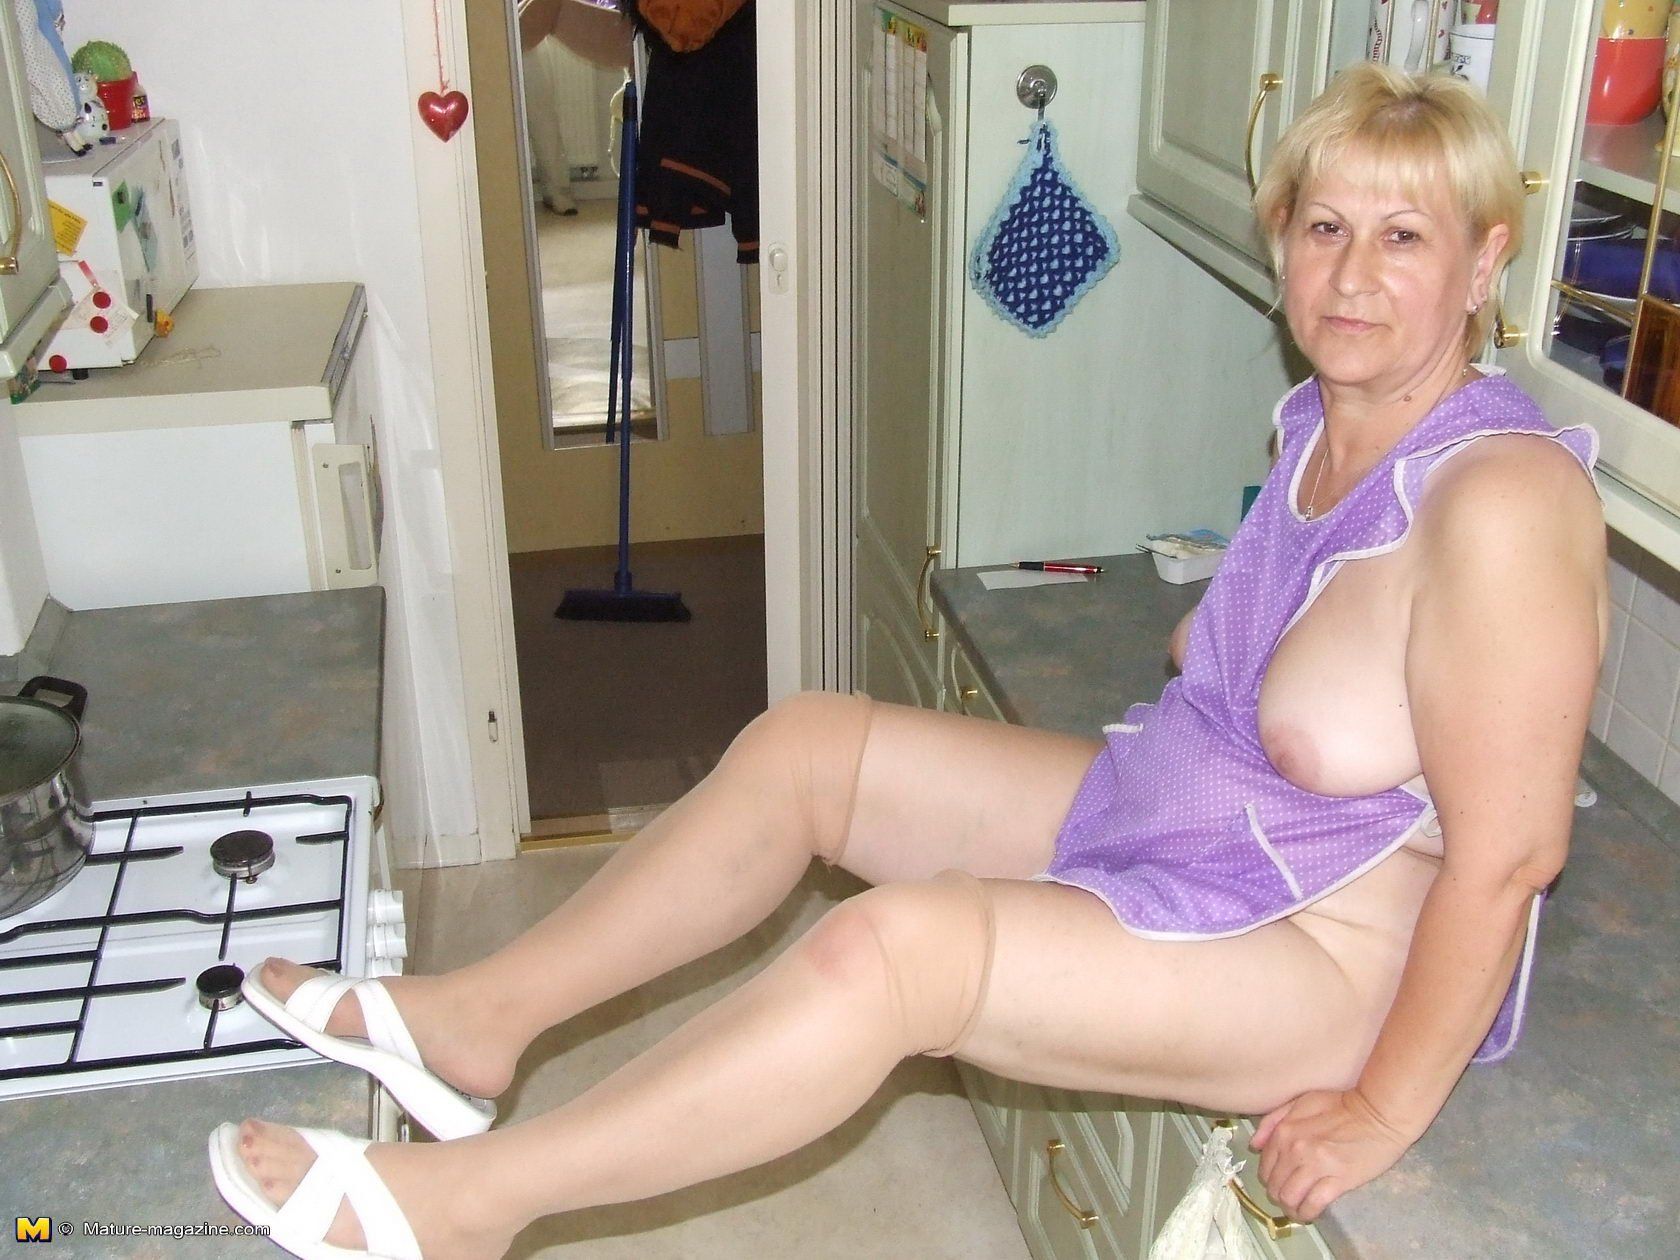 Amateur housewife tgp. Most watched pics site